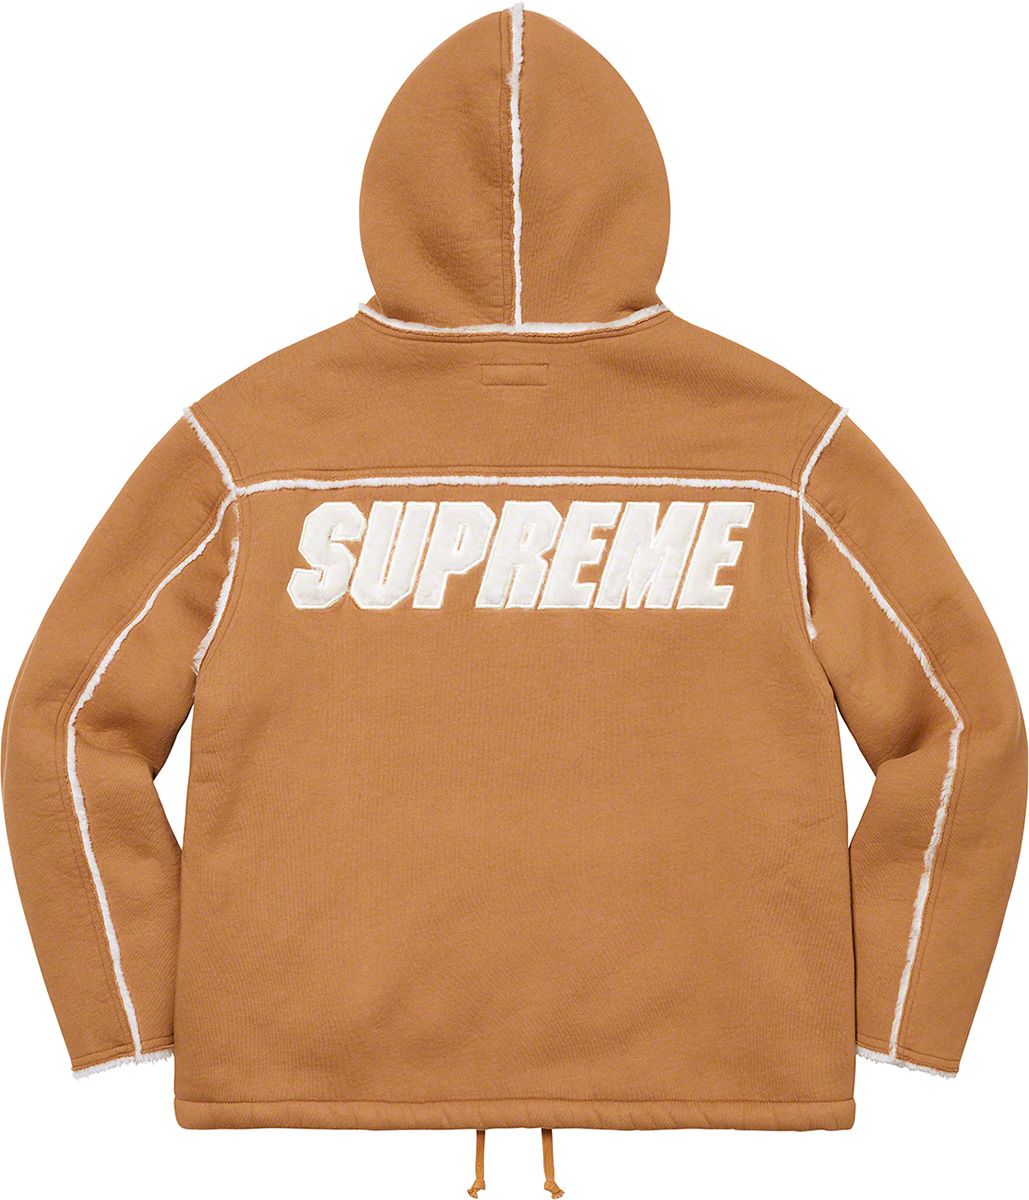 Faux Shearling Hooded Jacket - Fall/Winter 2021 Preview – Supreme